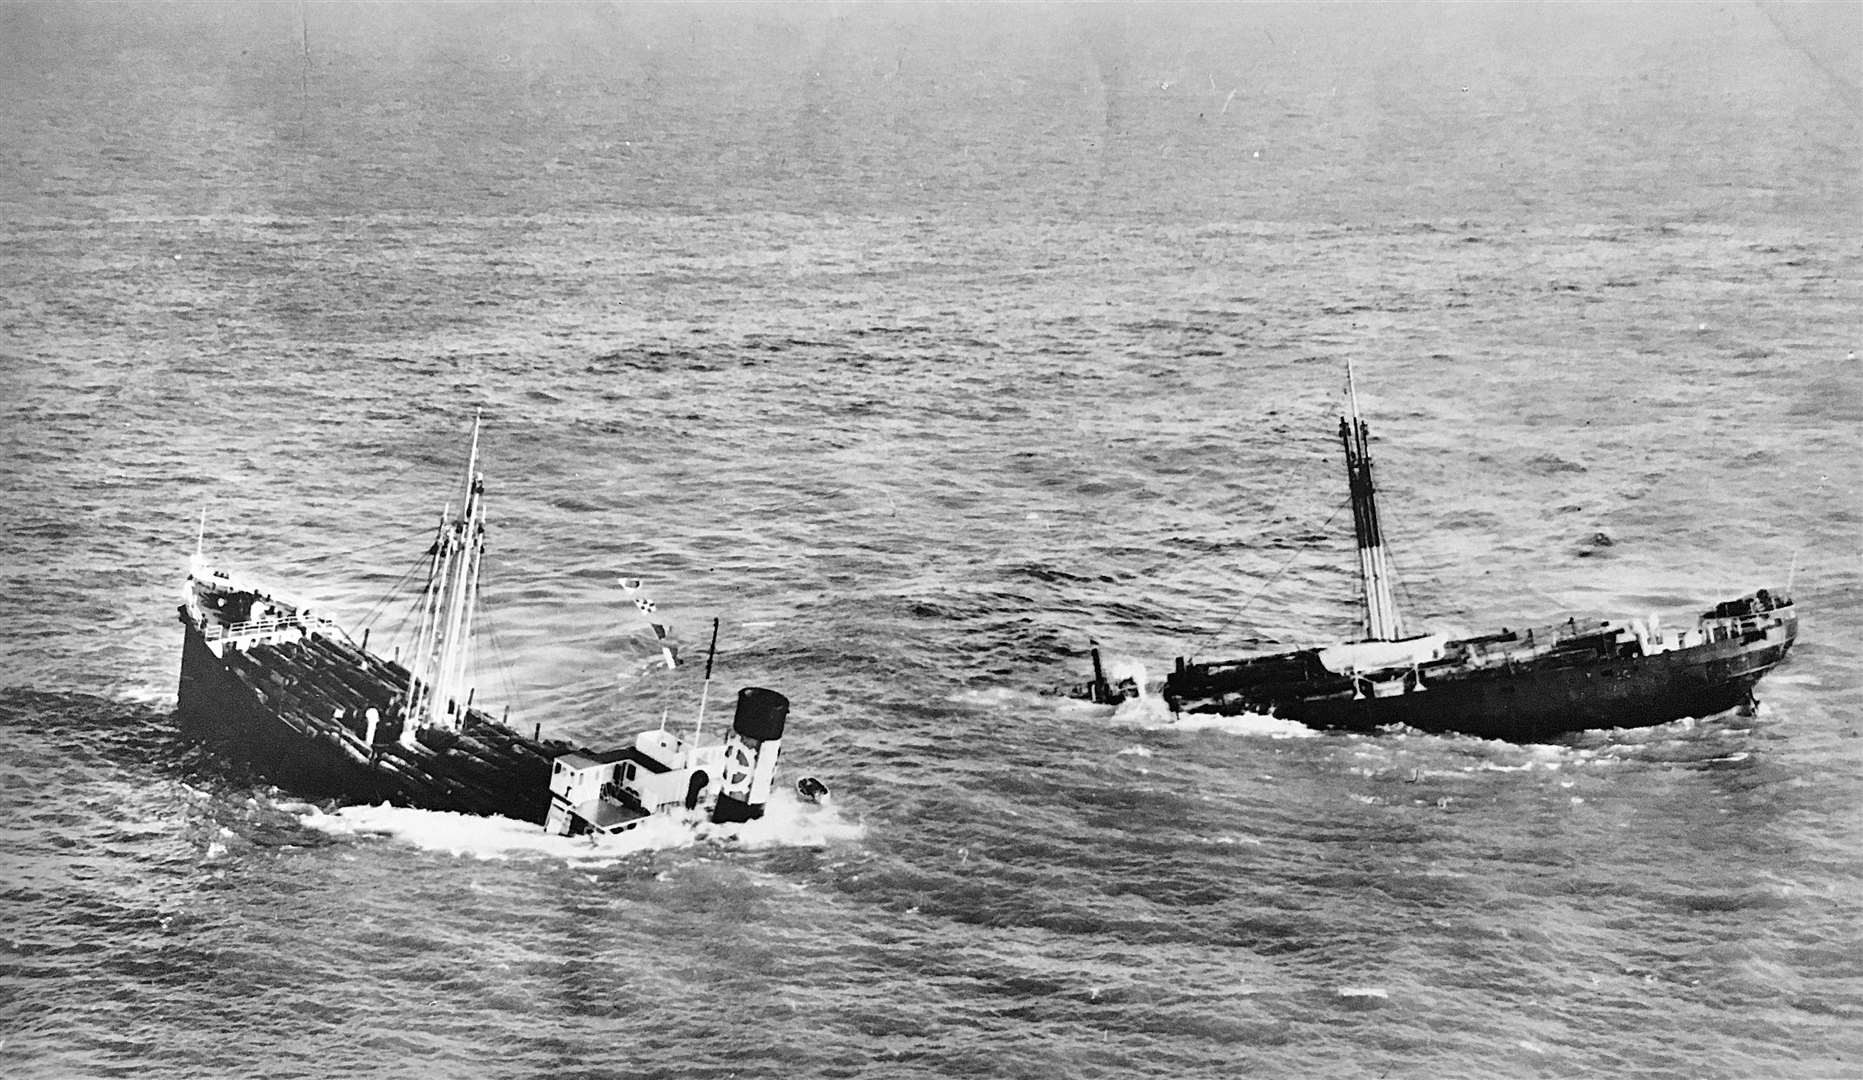 Wreck of the Agen. Photo: Colin Varrall